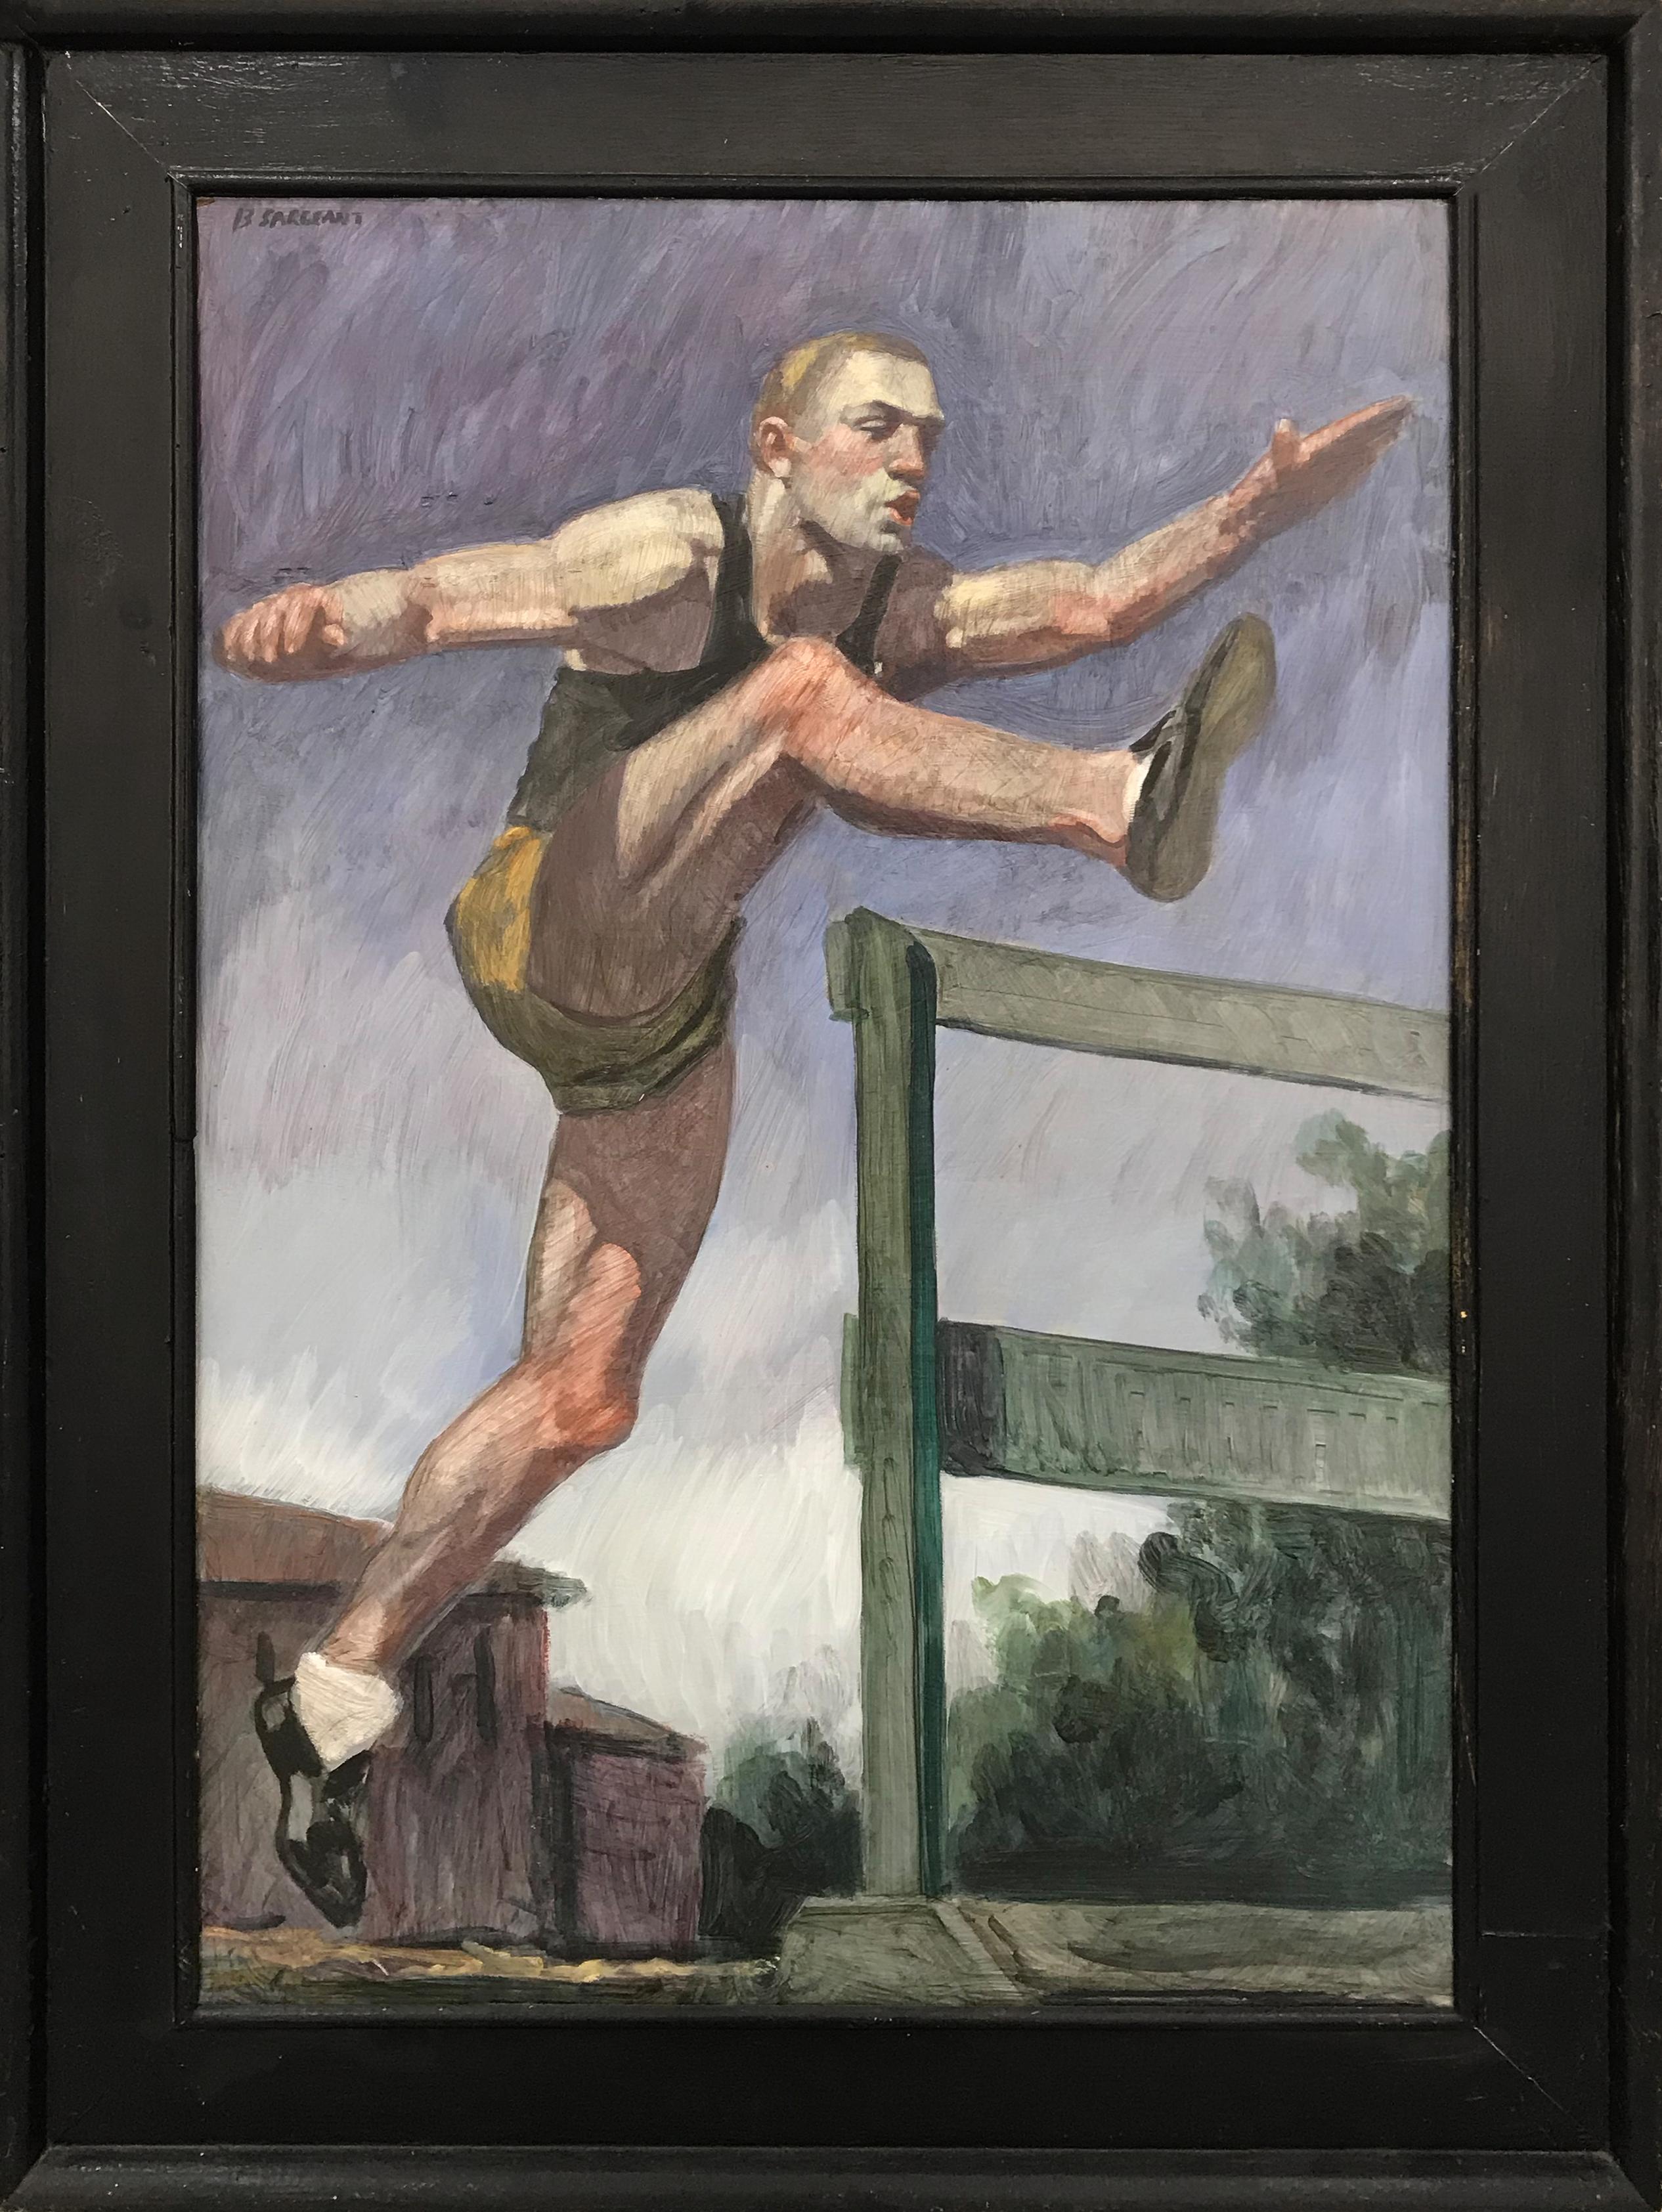 [Bruce Sargeant (1898-1938)] Study for Jumping the Hurdles - Painting by Mark Beard